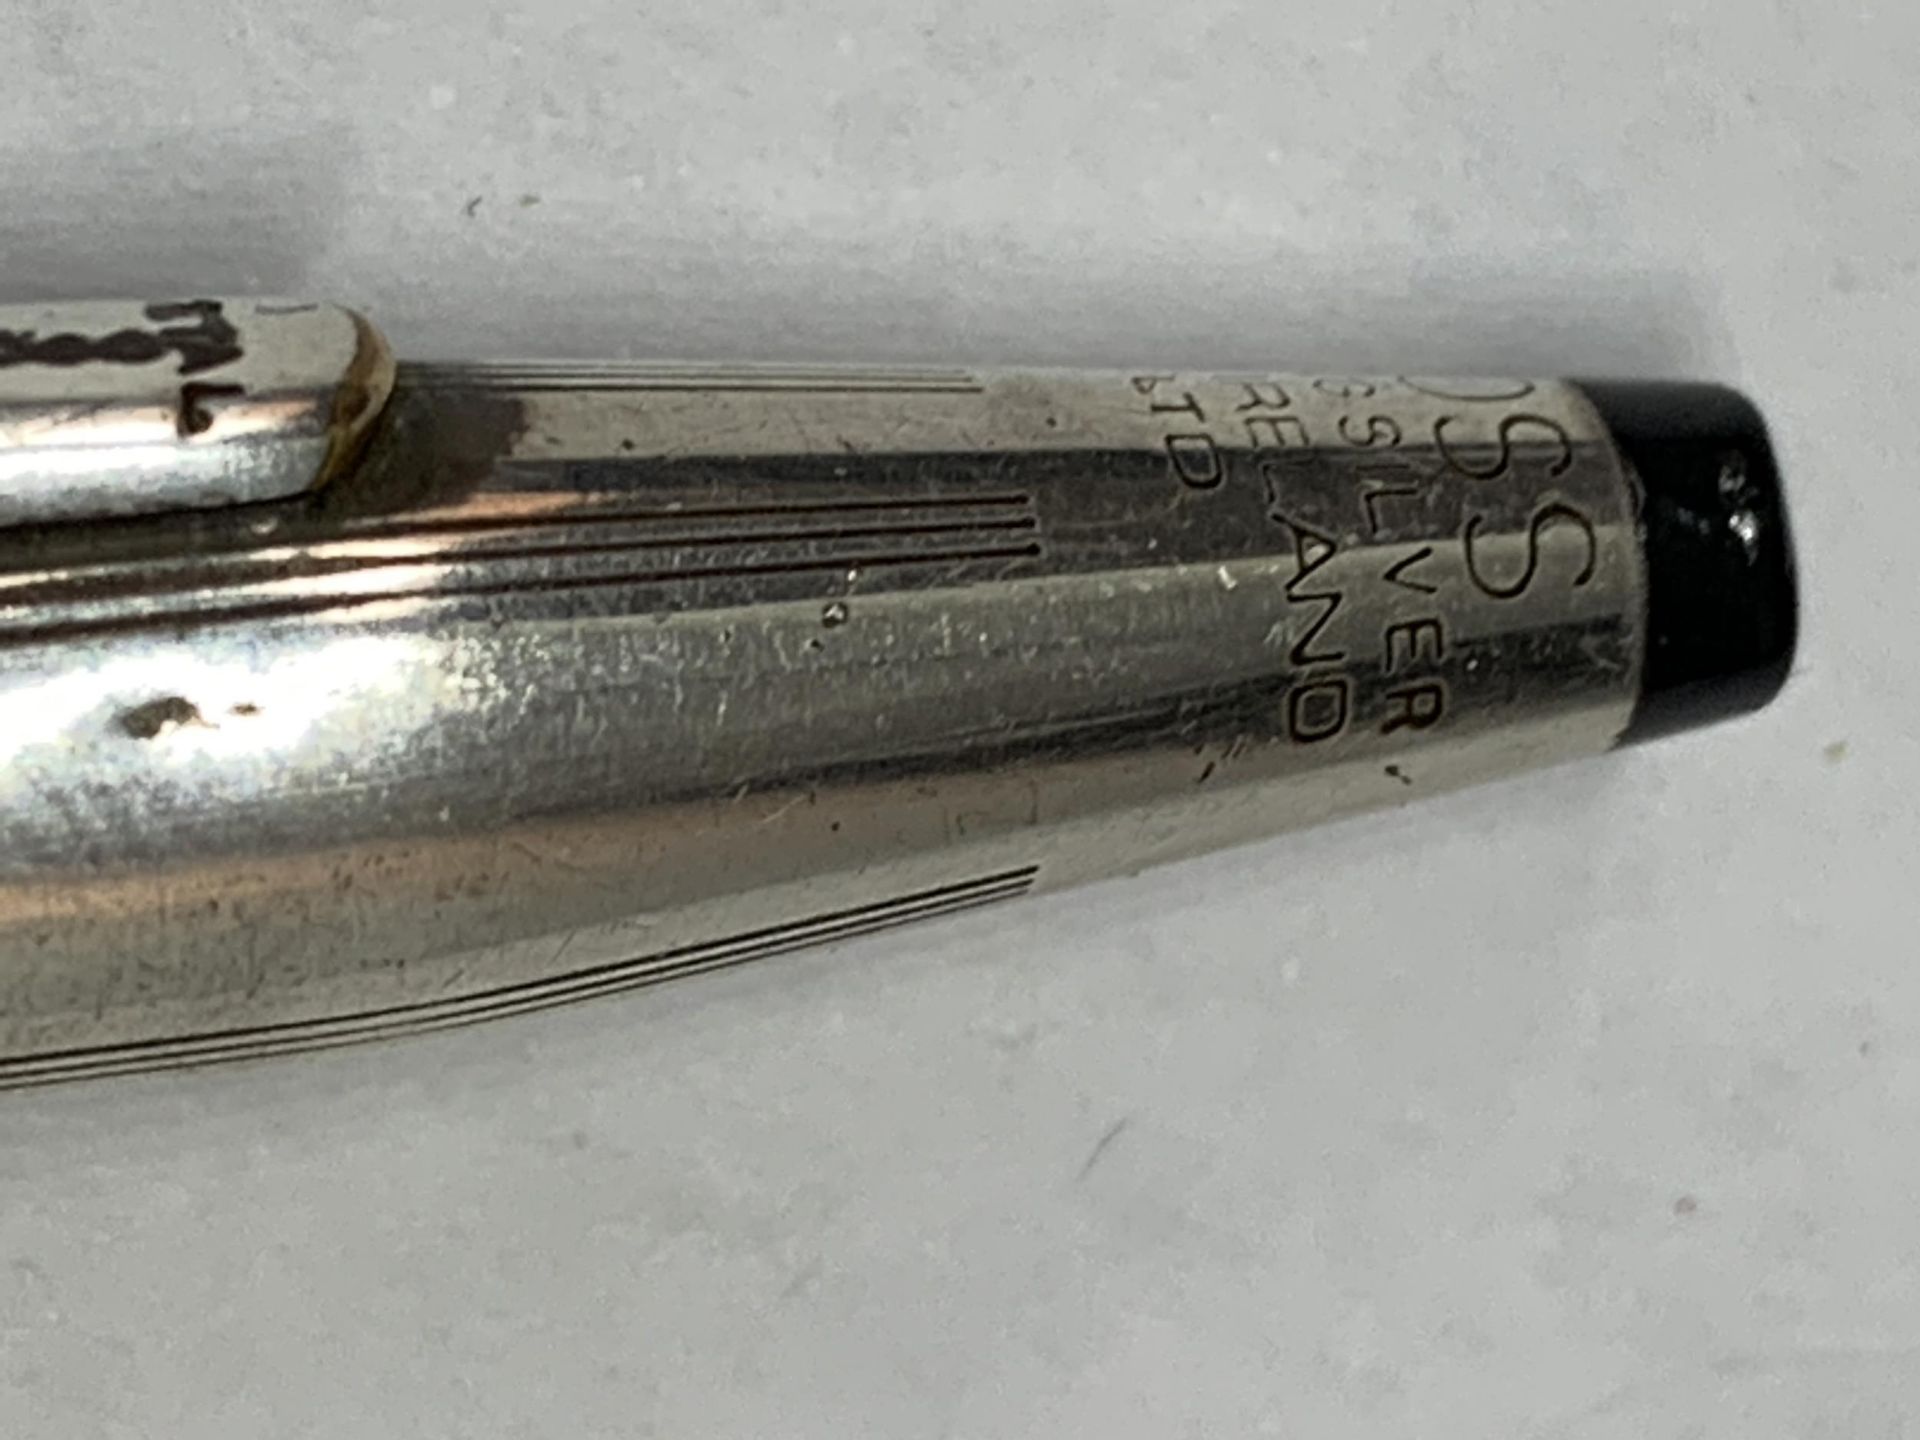 A SILVER CROSS PEN MADE IN IRELAND - Image 3 of 3